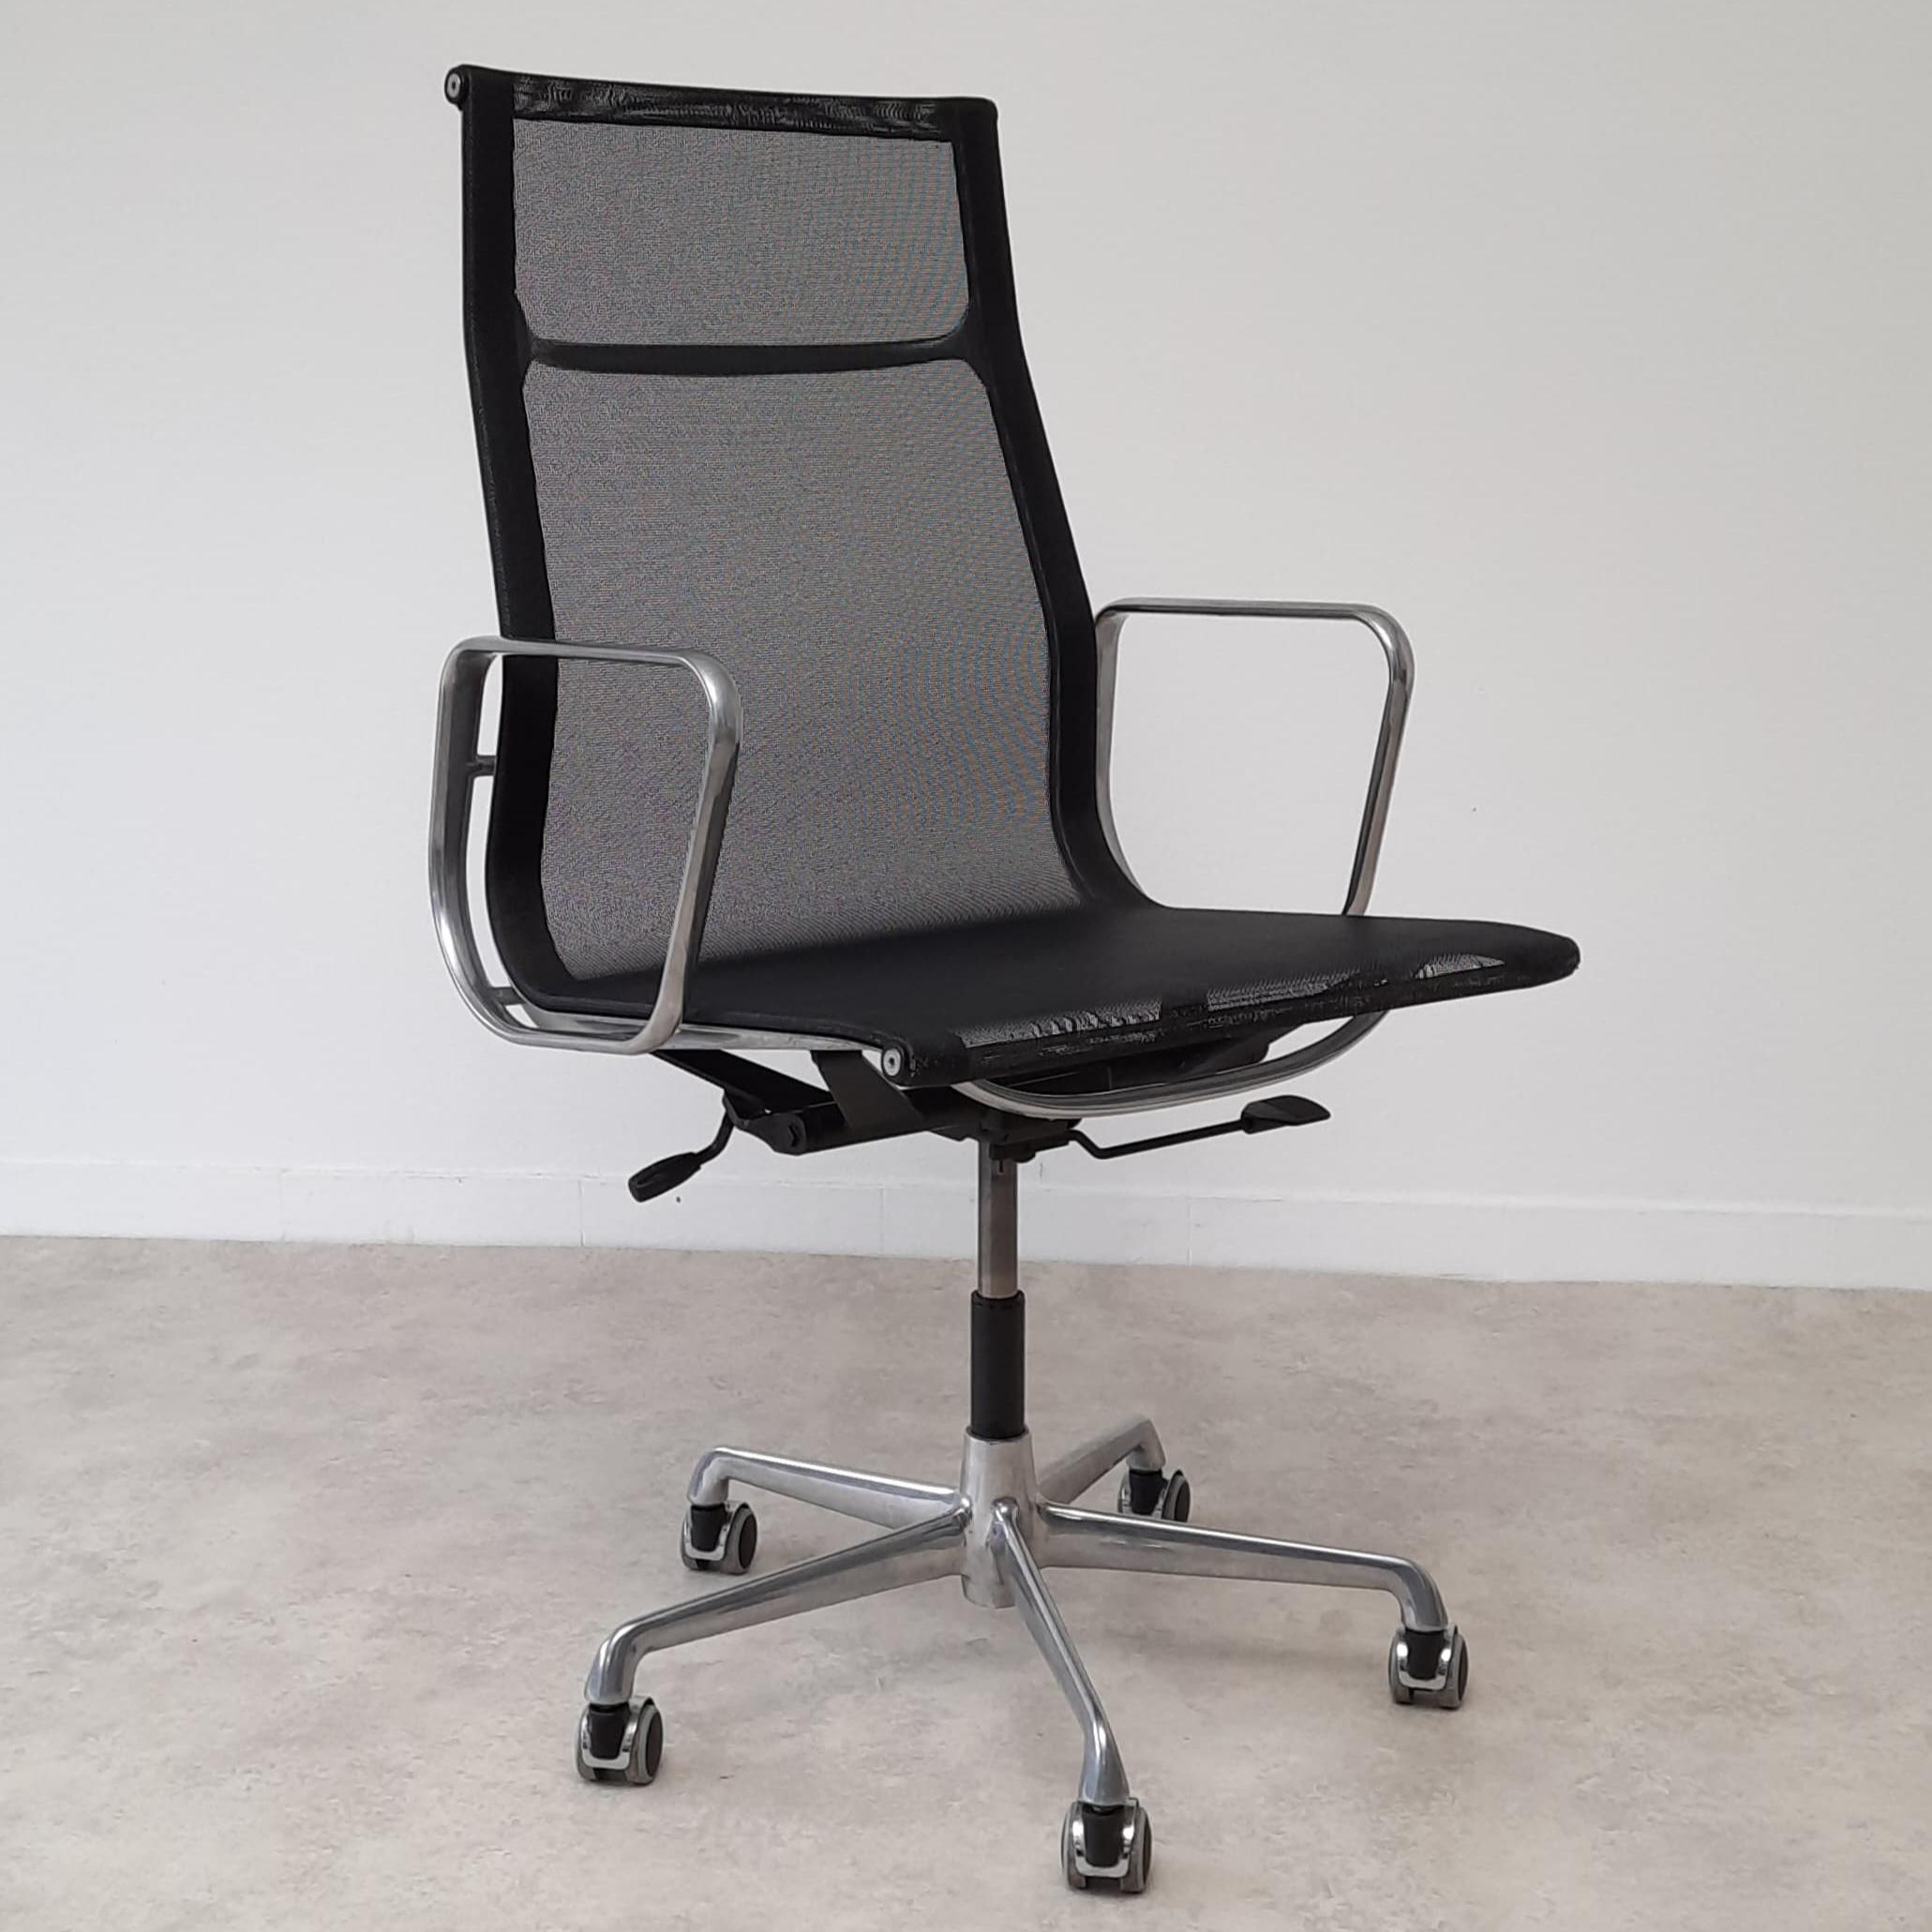 
Gorgeous office chair design by Charles Eames for Hermann Miller, executive model EA 119.

The armchair was built by ICF Padova in the 1960s, the only company to have a construction licence from Hermann Miller, same materials, same moulds, same